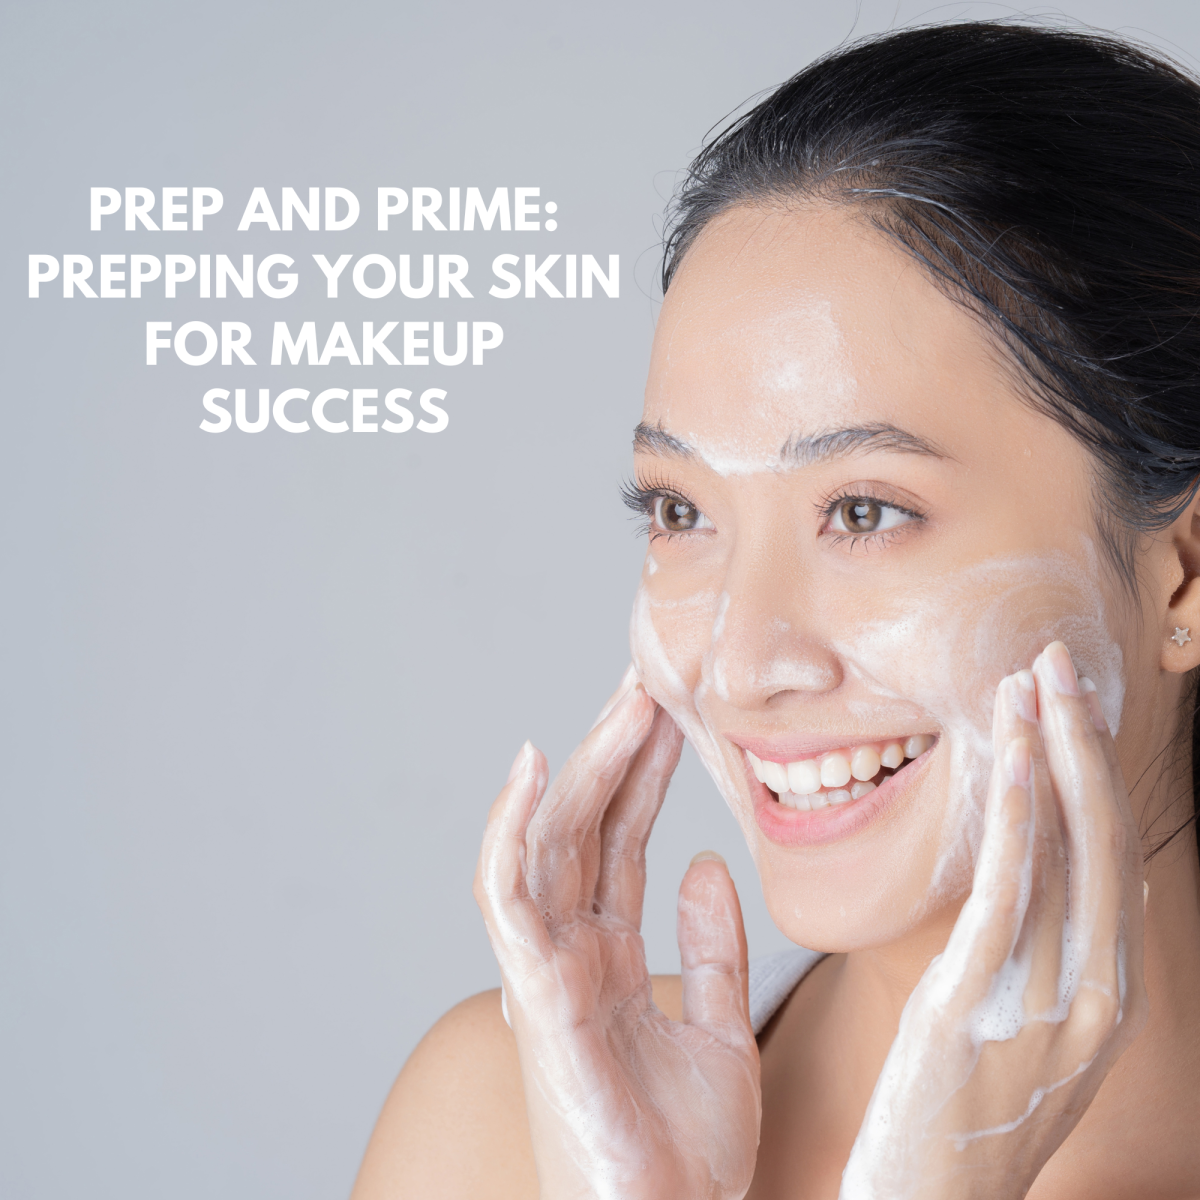 Prep and Prime: Prepping Your Skin for Makeup Success